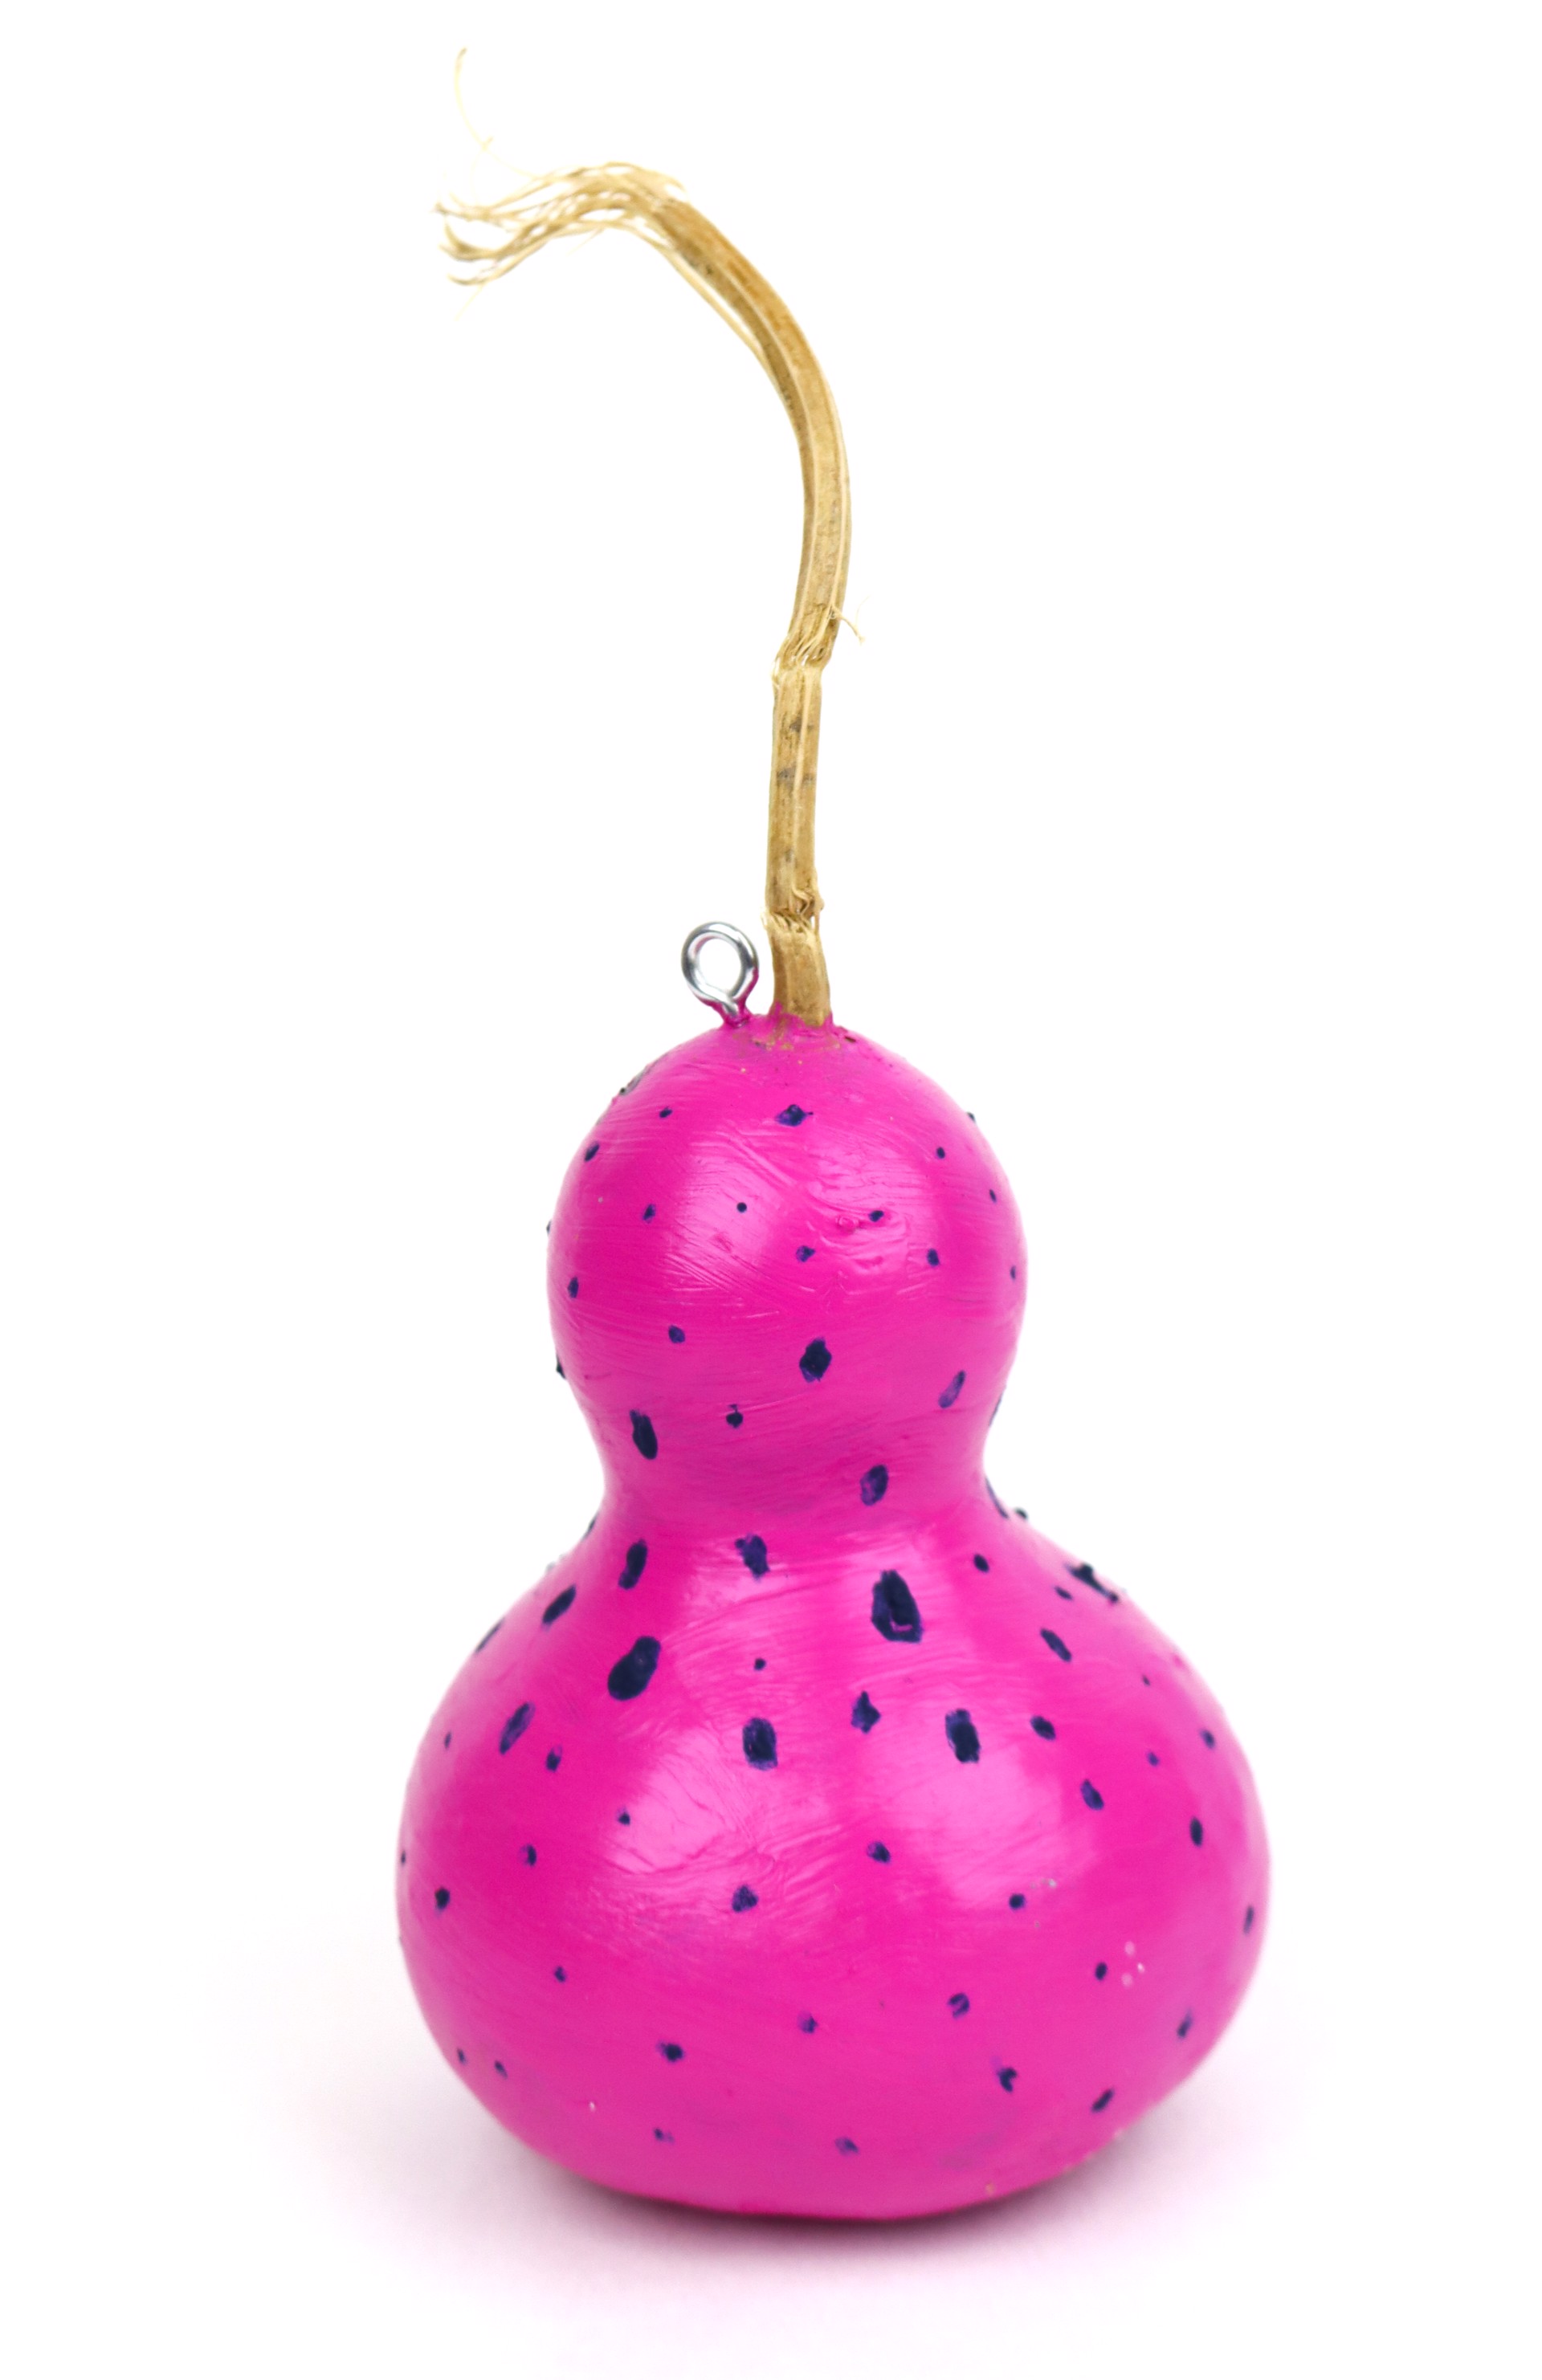 Pink and Polka Dots (gourd ornament) by Joel Martinez